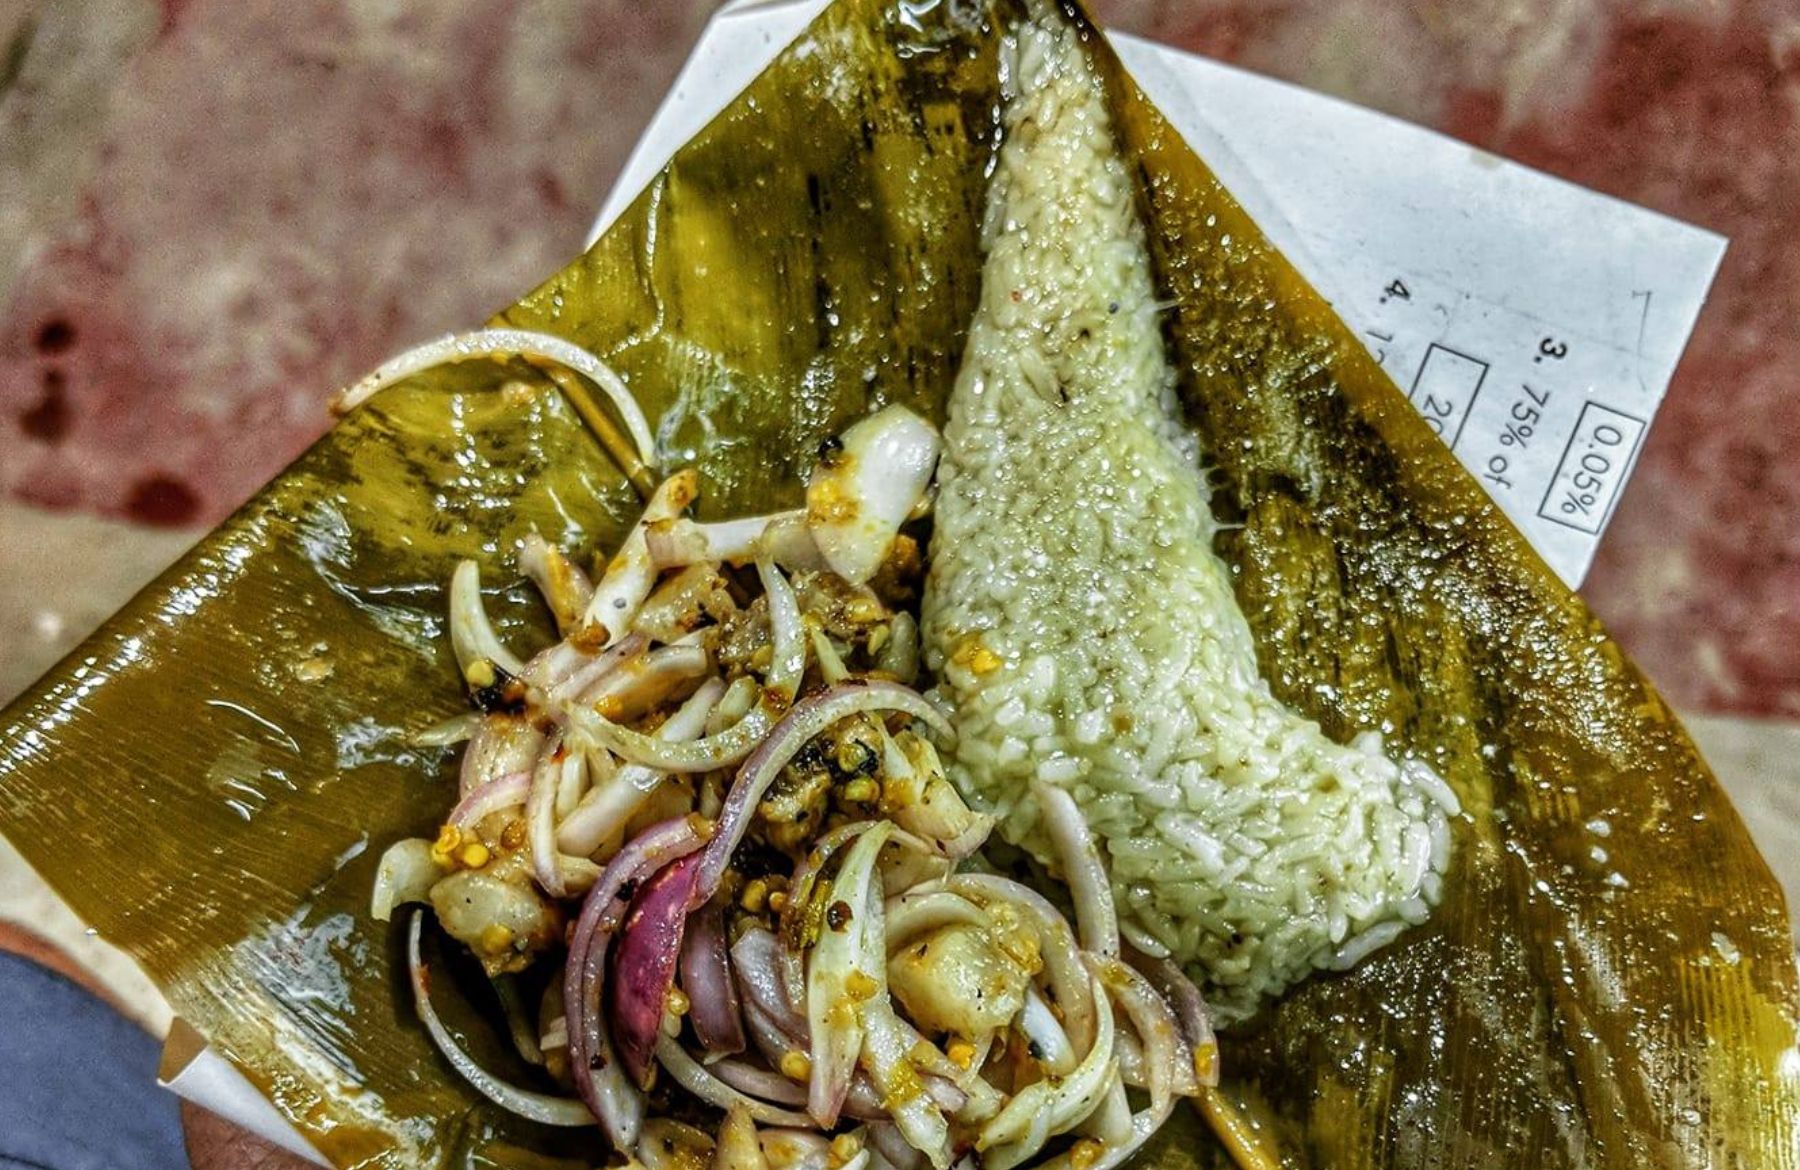 Tripura Had Its First Forest Food Festival; A Sneak-Peek Into Some Of Their Local Dishes